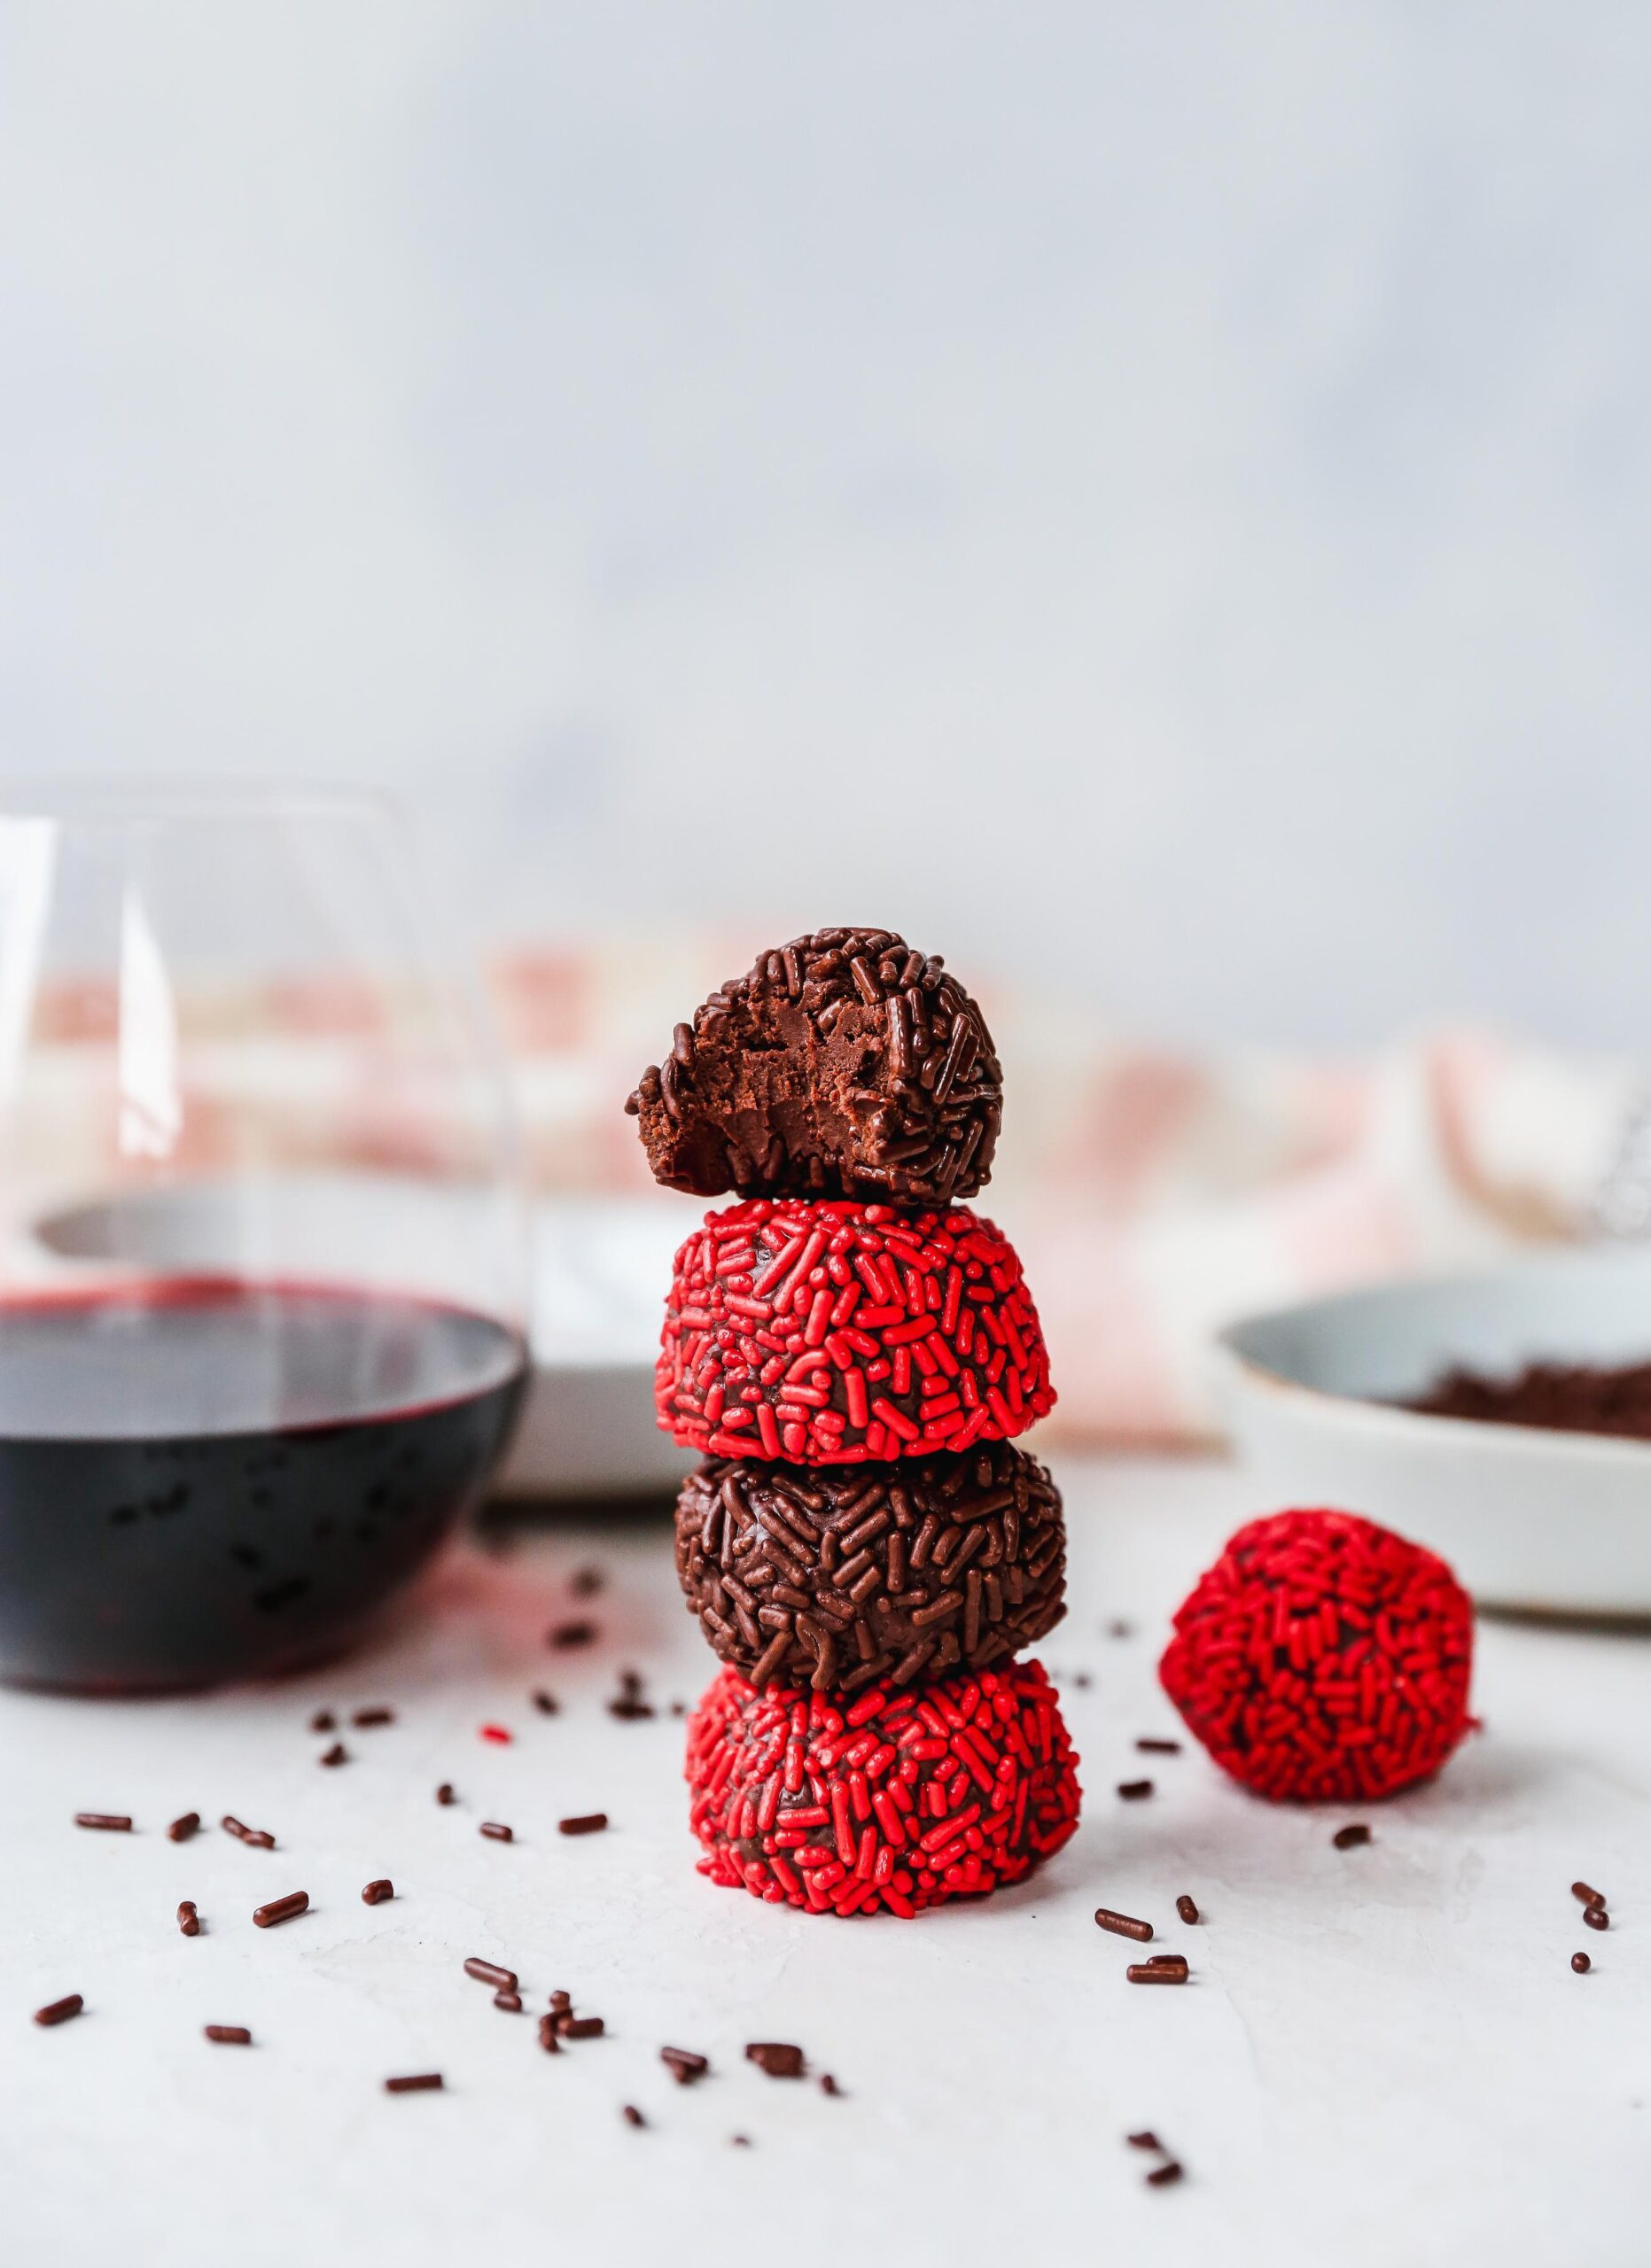  These truffles are also a delightful gift for your loved ones who appreciate the finer things in life.